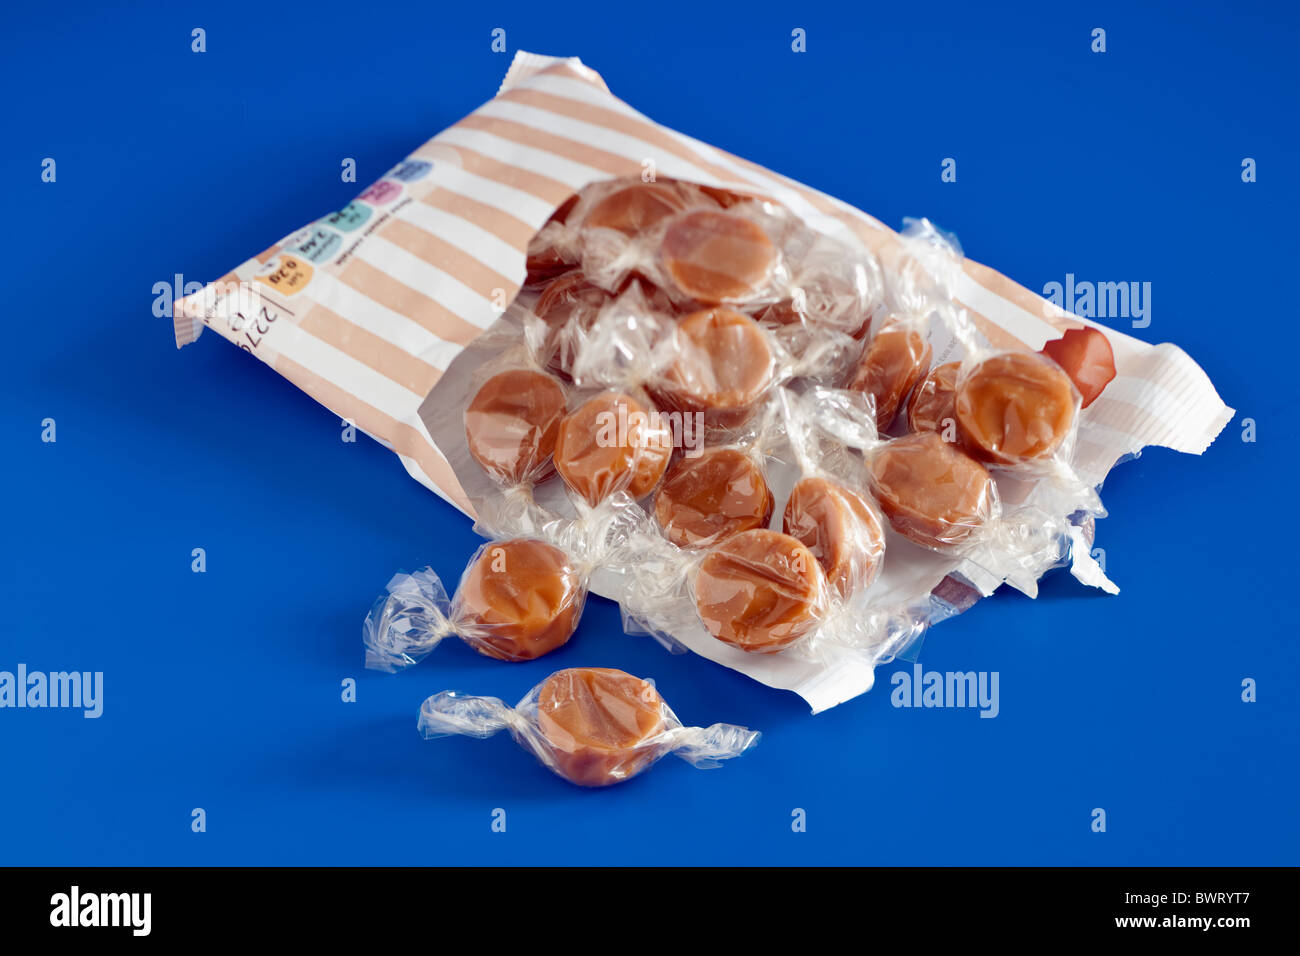 Torn open bag of clear cellophane wrapped toffee sweets Stock Photo